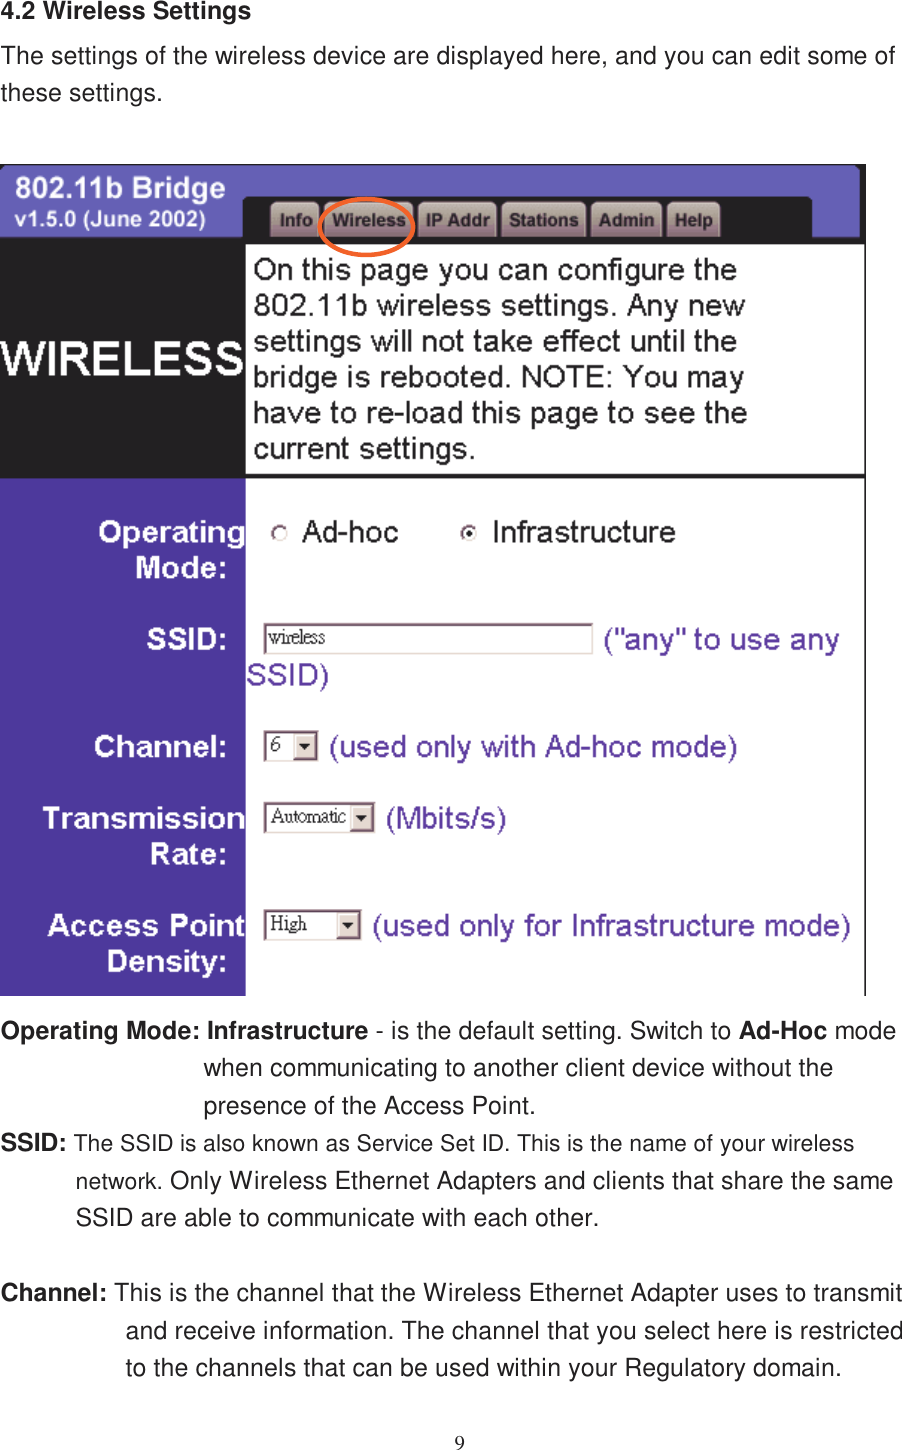 94.2 Wireless SettingsThe settings of the wireless device are displayed here, and you can edit some ofthese settings.Operating Mode: Infrastructure - is the default setting. Switch to Ad-Hoc modewhen communicating to another client device without thepresence of the Access Point.SSID: The SSID is also known as Service Set ID. This is the name of your wirelessnetwork. Only Wireless Ethernet Adapters and clients that share the sameSSID are able to communicate with each other.Channel: This is the channel that the Wireless Ethernet Adapter uses to transmitand receive information. The channel that you select here is restrictedto the channels that can be used within your Regulatory domain.